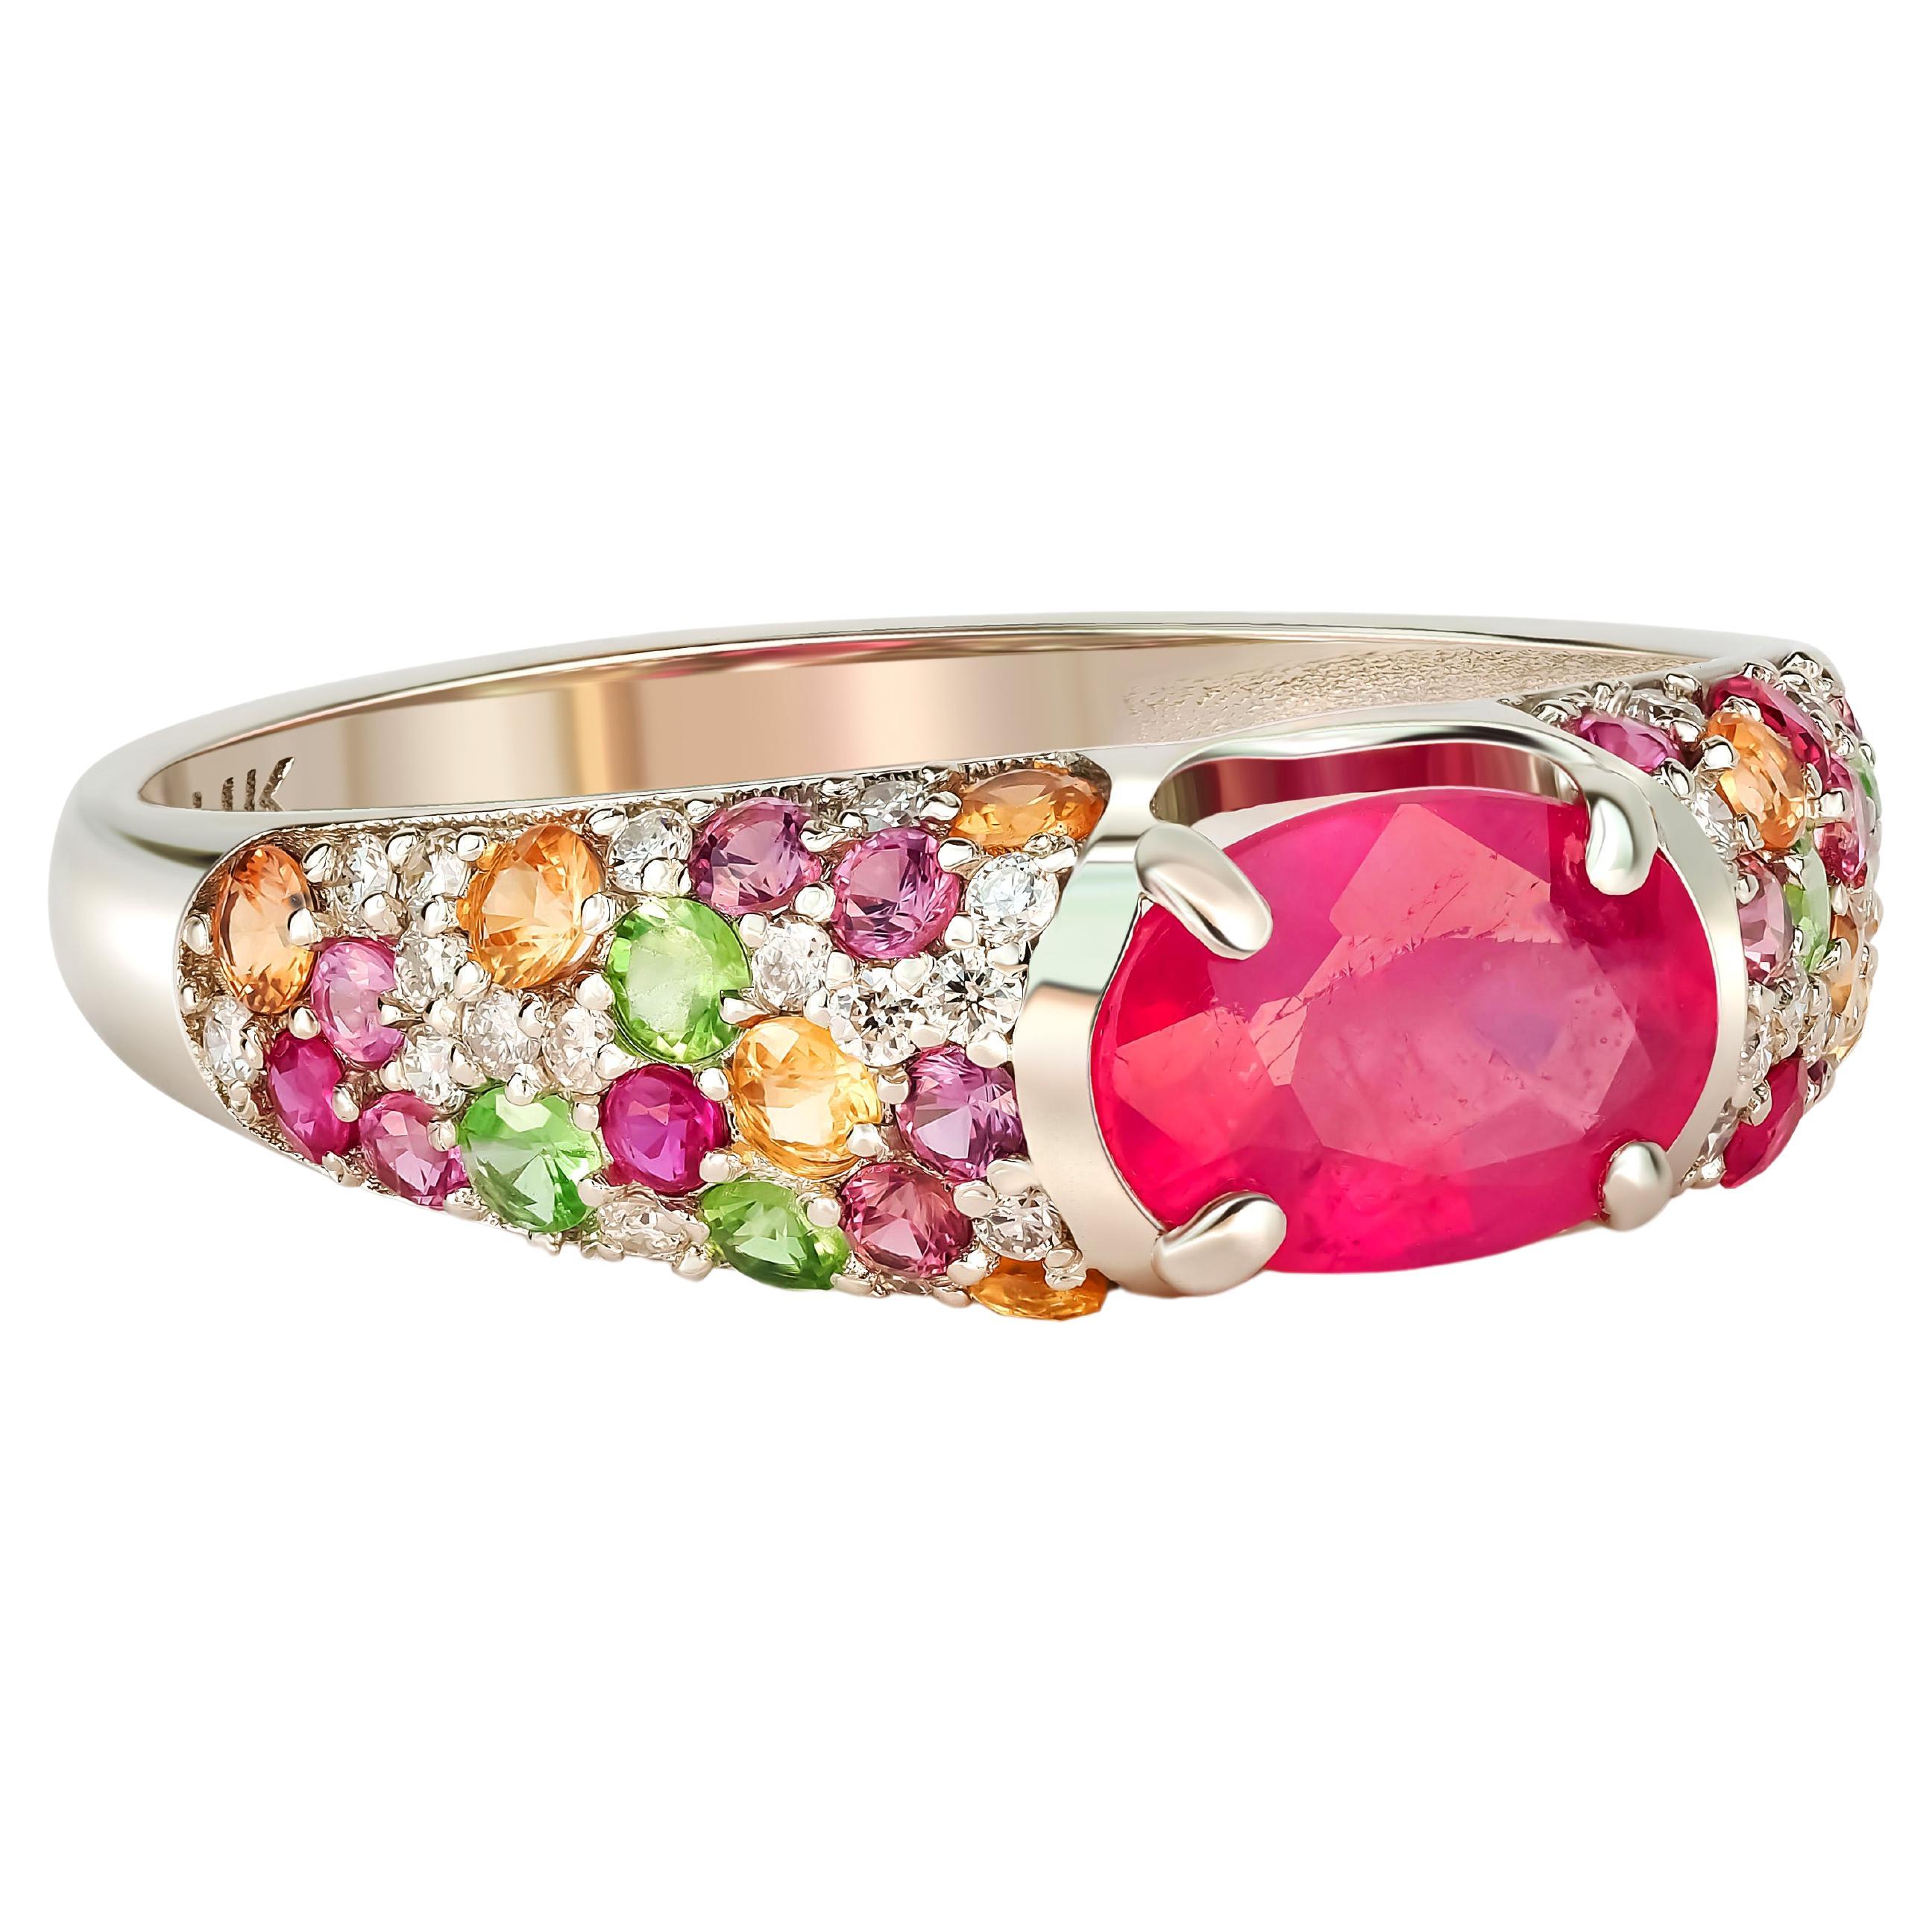 For Sale:  14k gold ruby and multicolored gemstones ring.